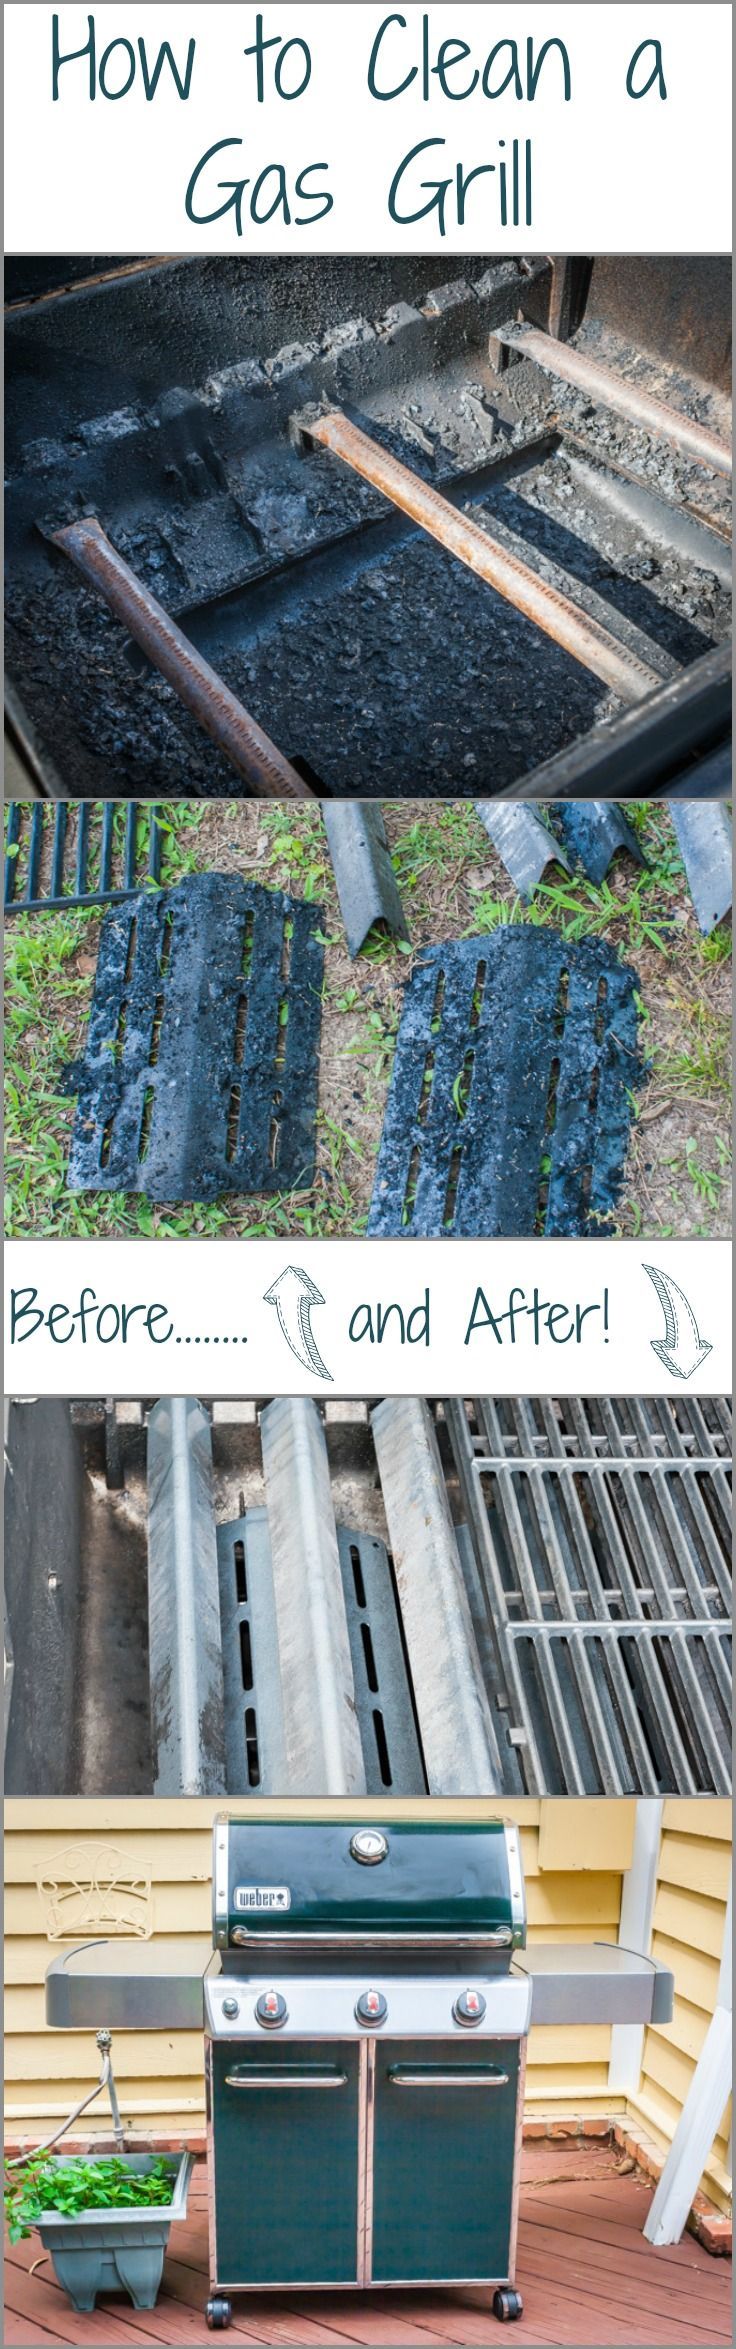 How to clean a Gas Grill! It’s so important that you properly clean your gas grill if you want great tasting food! With easy step